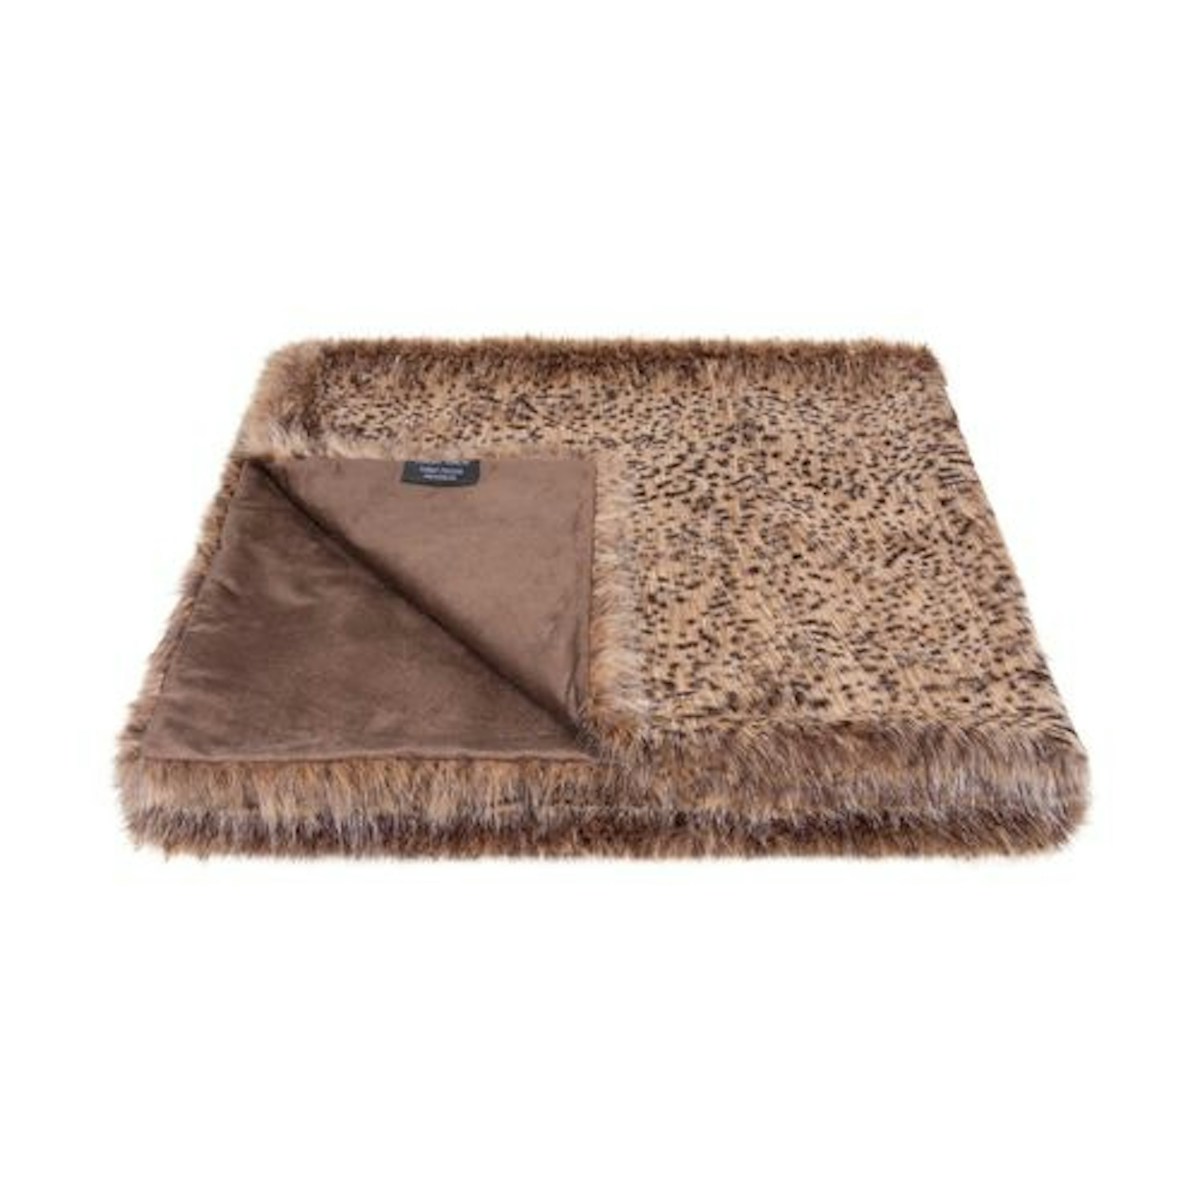 Brown Wildcat Throw - 9 Best Luxury Throws & Blankets to Buy for your Home - Style Guide - LuxDeco.com